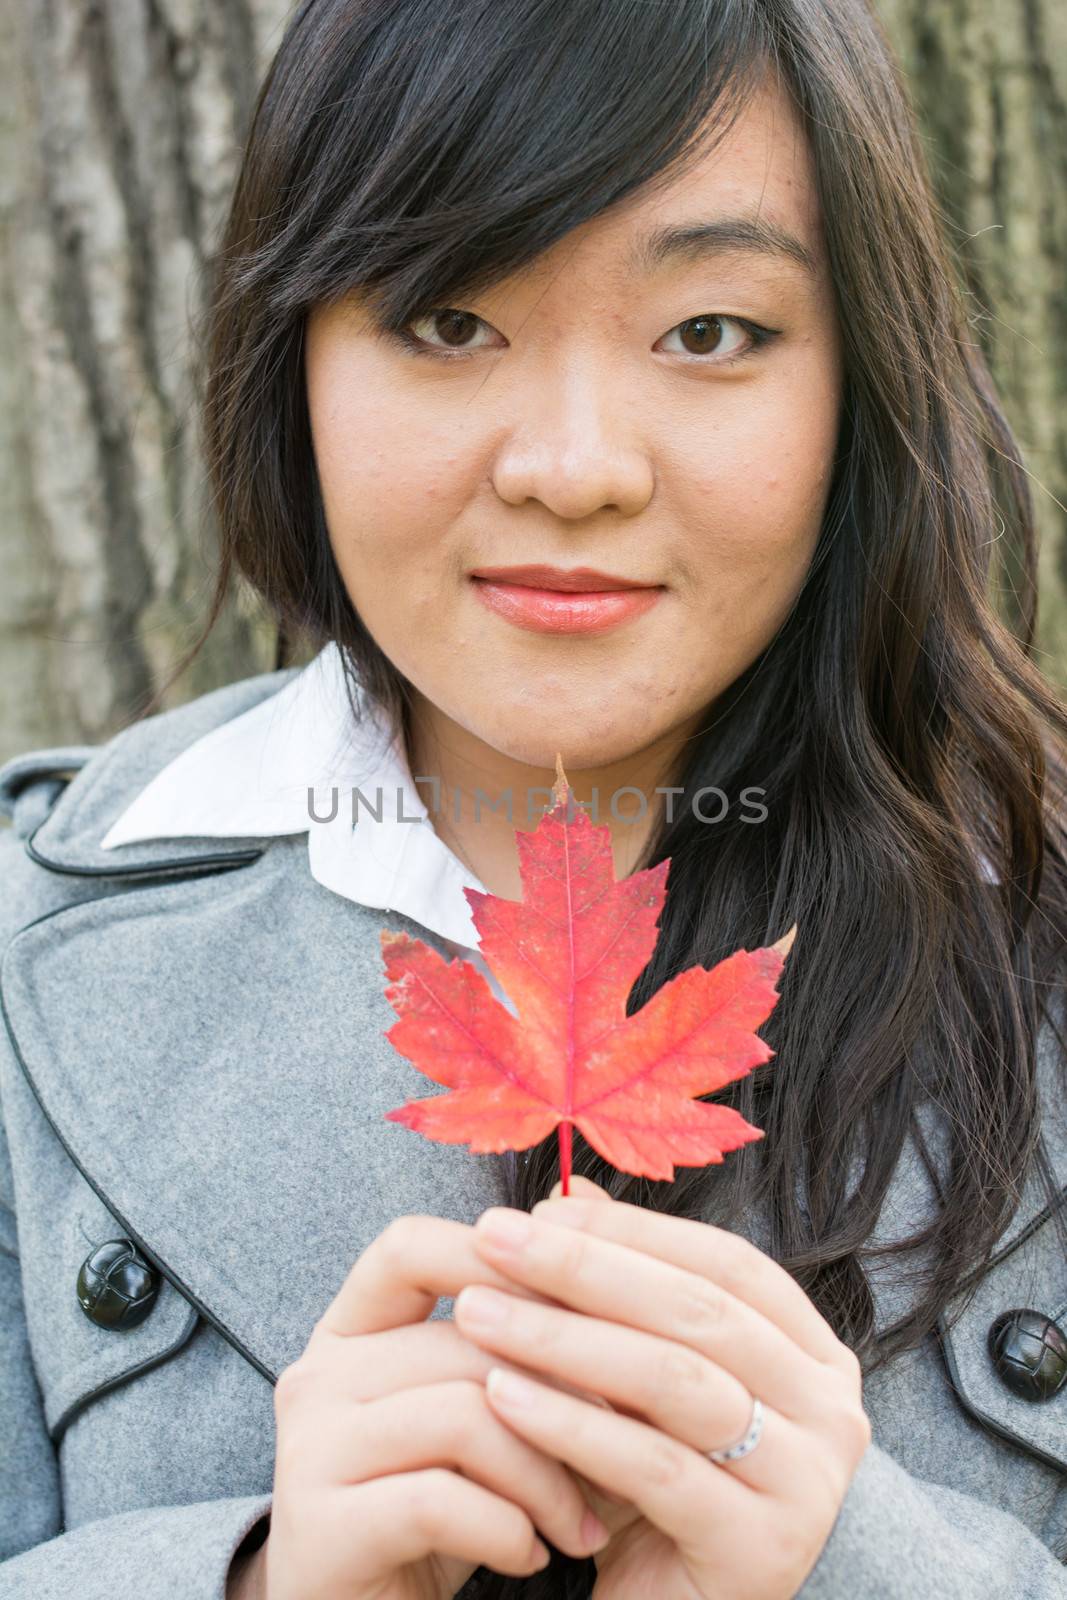 Autumn portrait of cute young woman in front of a maple tree holding a maple leaf